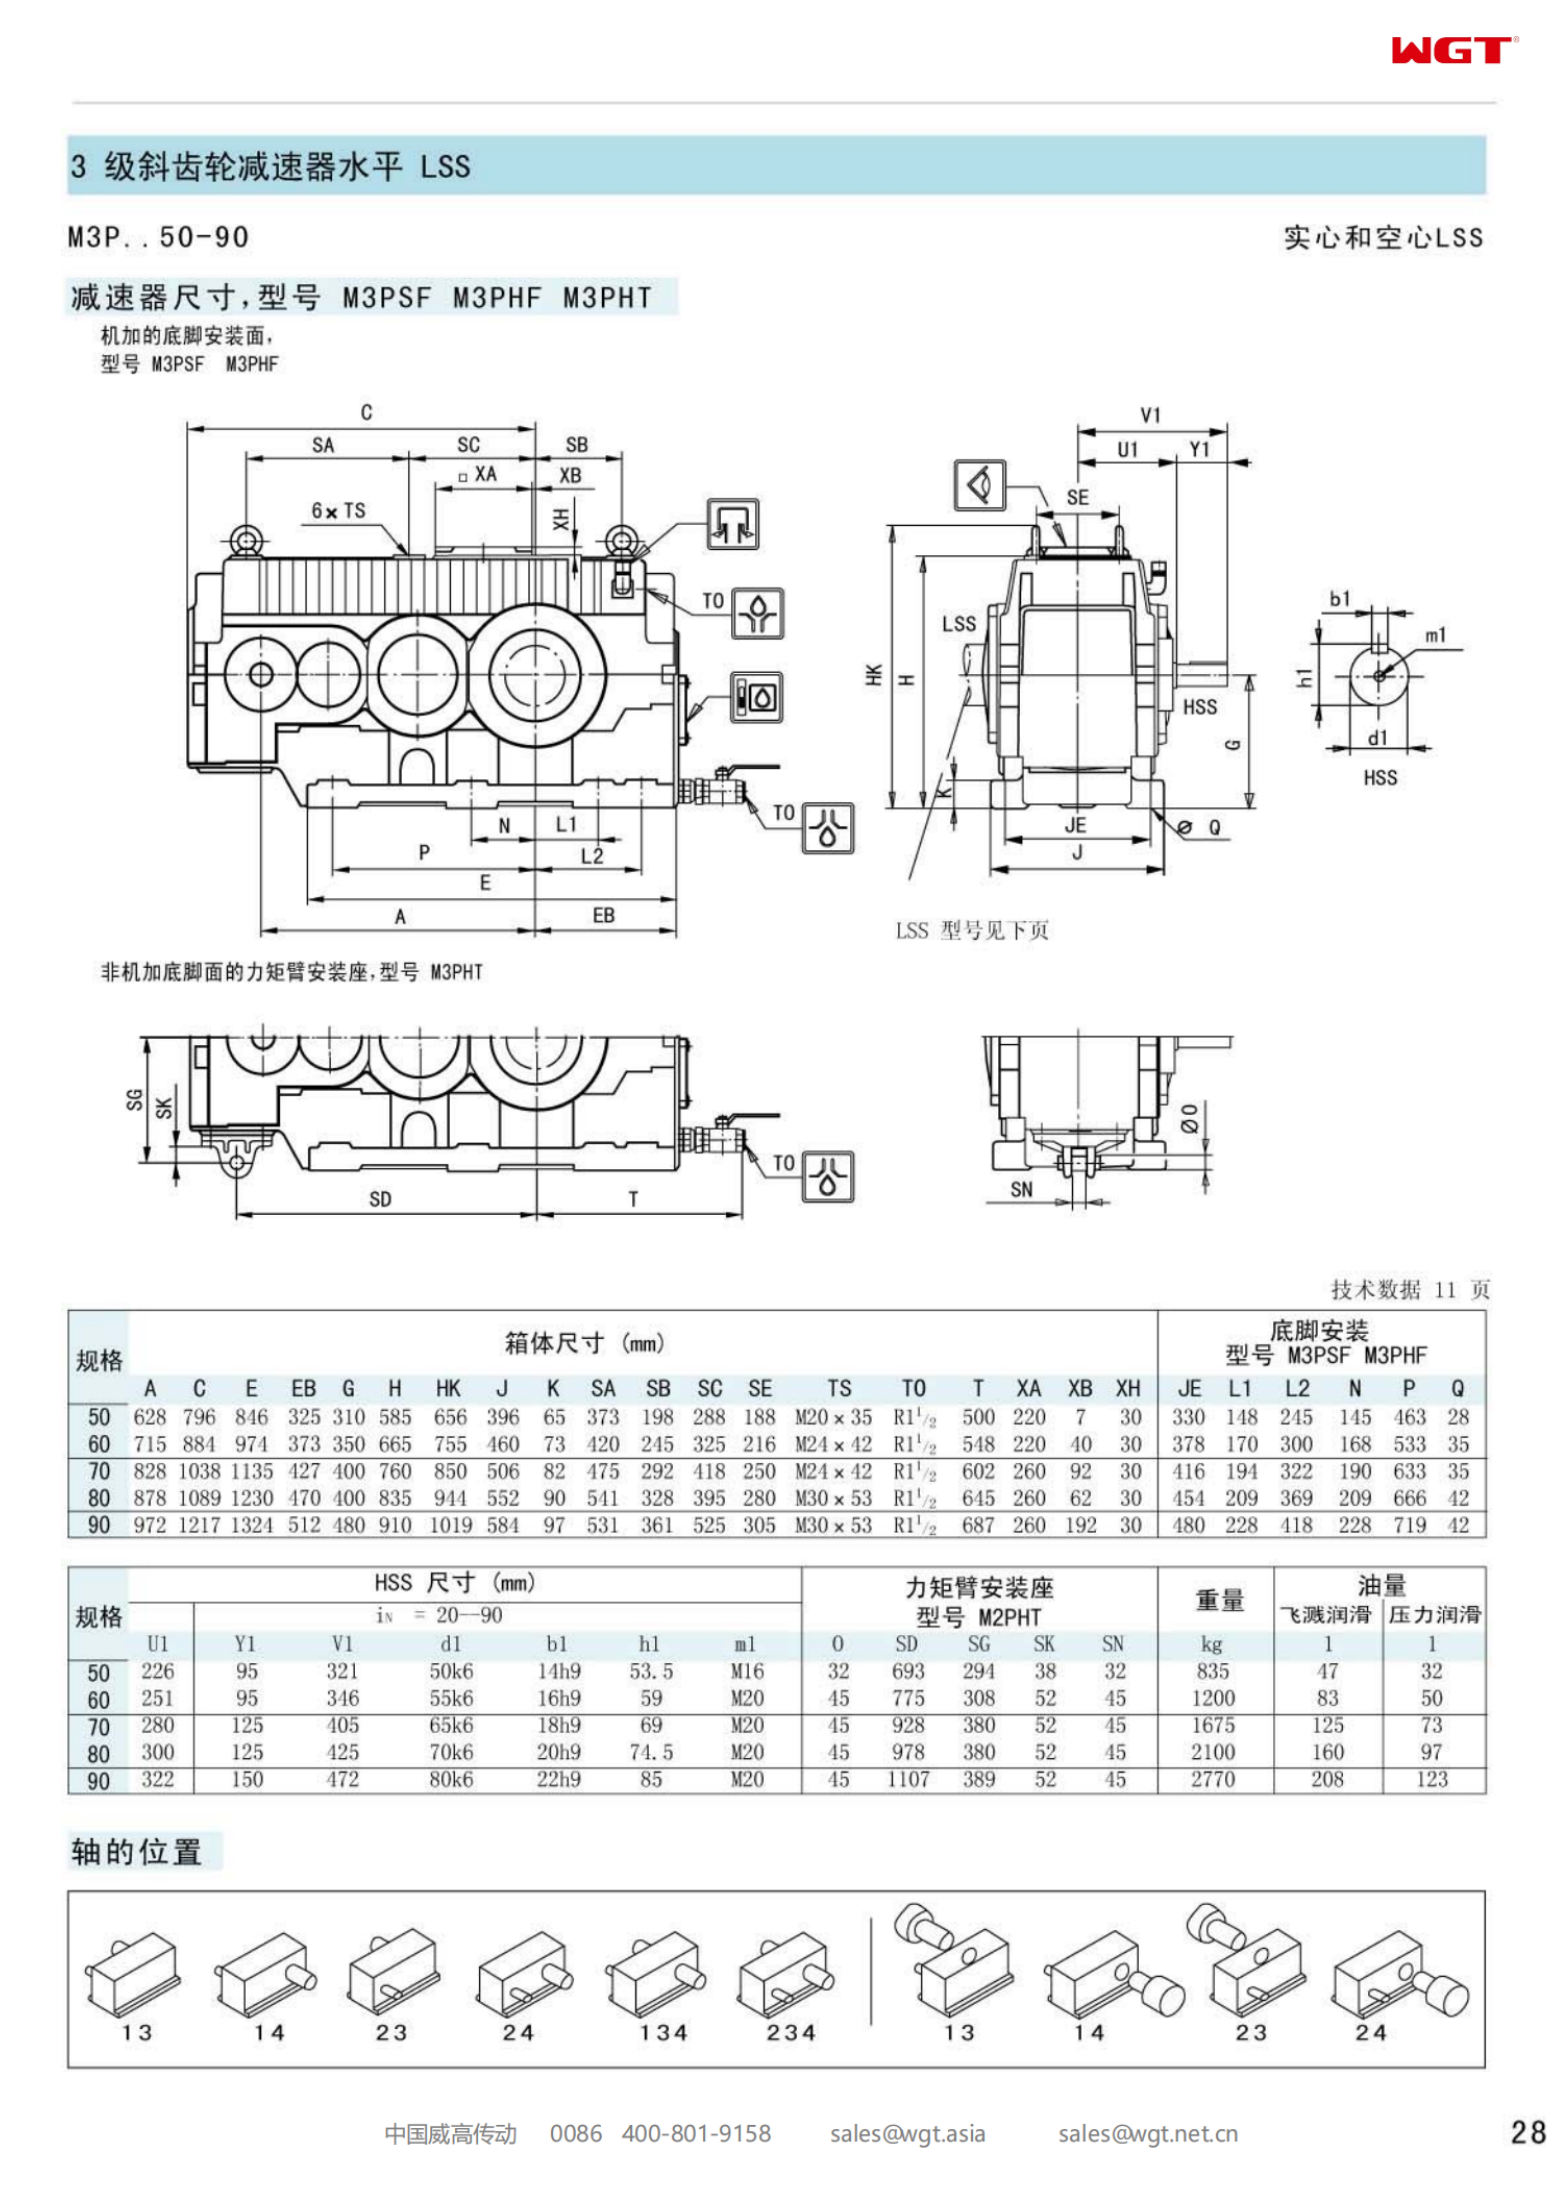 M3PHF70 Replace_SEW_M_Series Gearbox